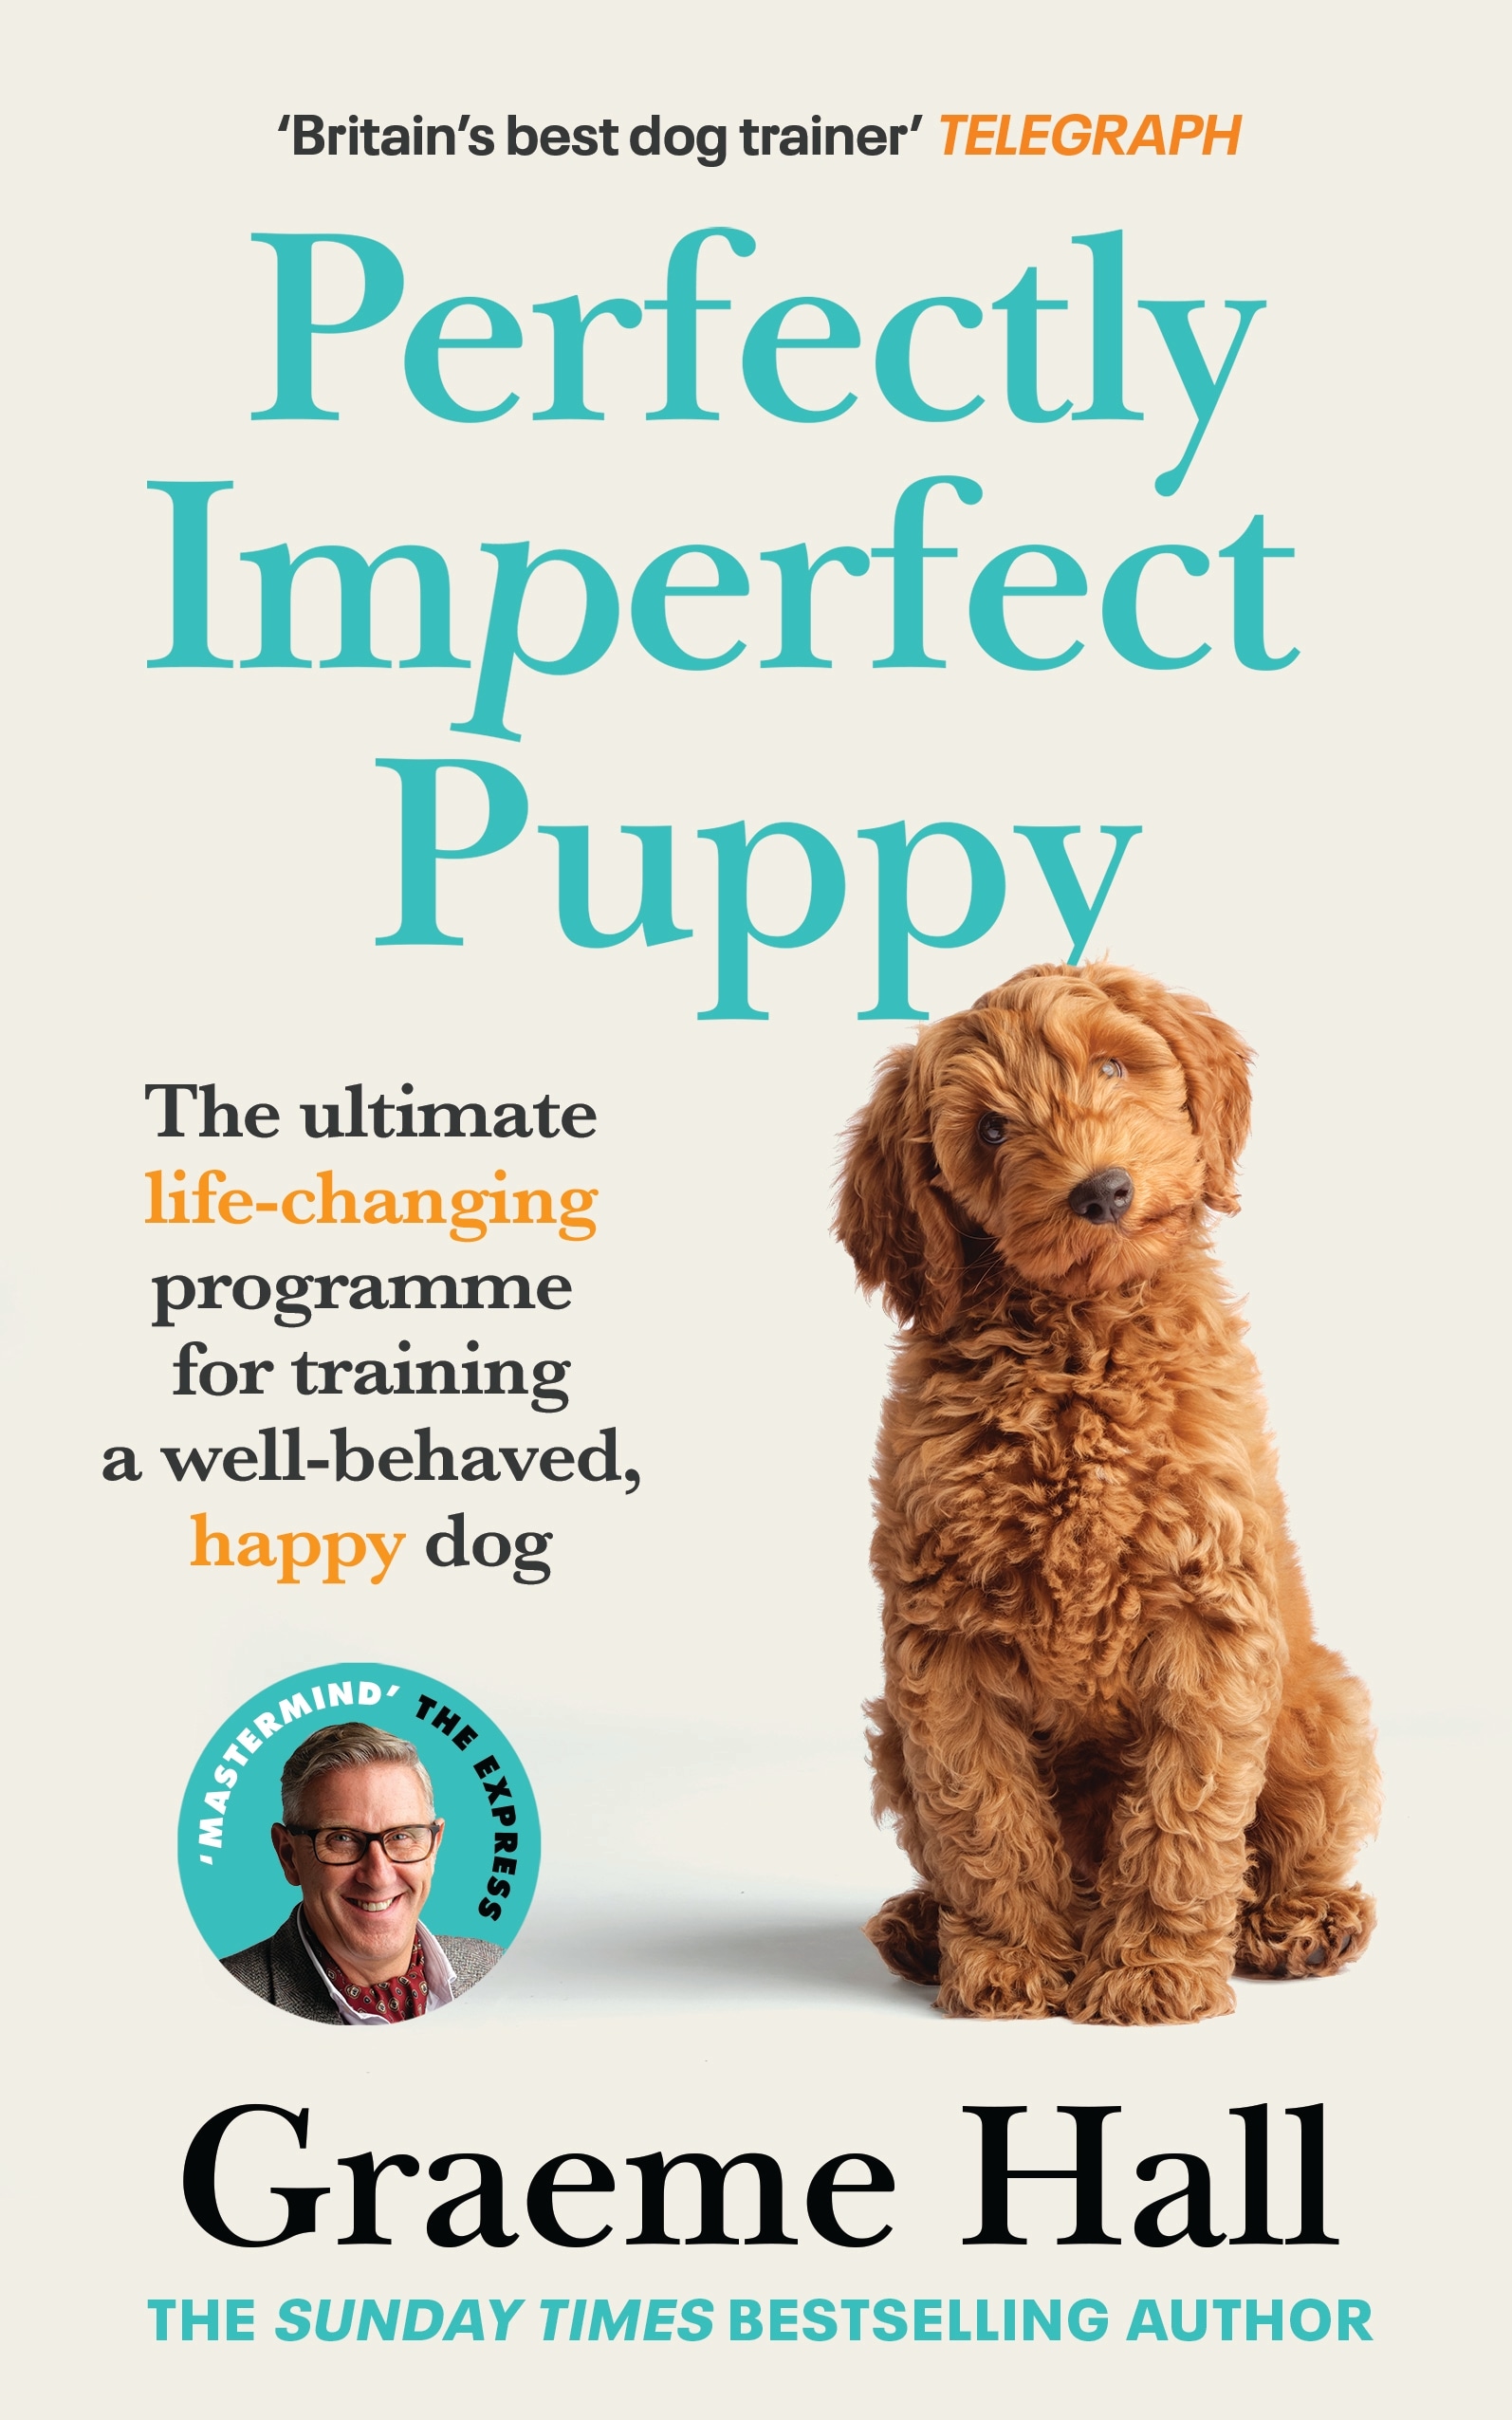 Book “Perfectly Imperfect Puppy” by Graeme Hall — March 17, 2022